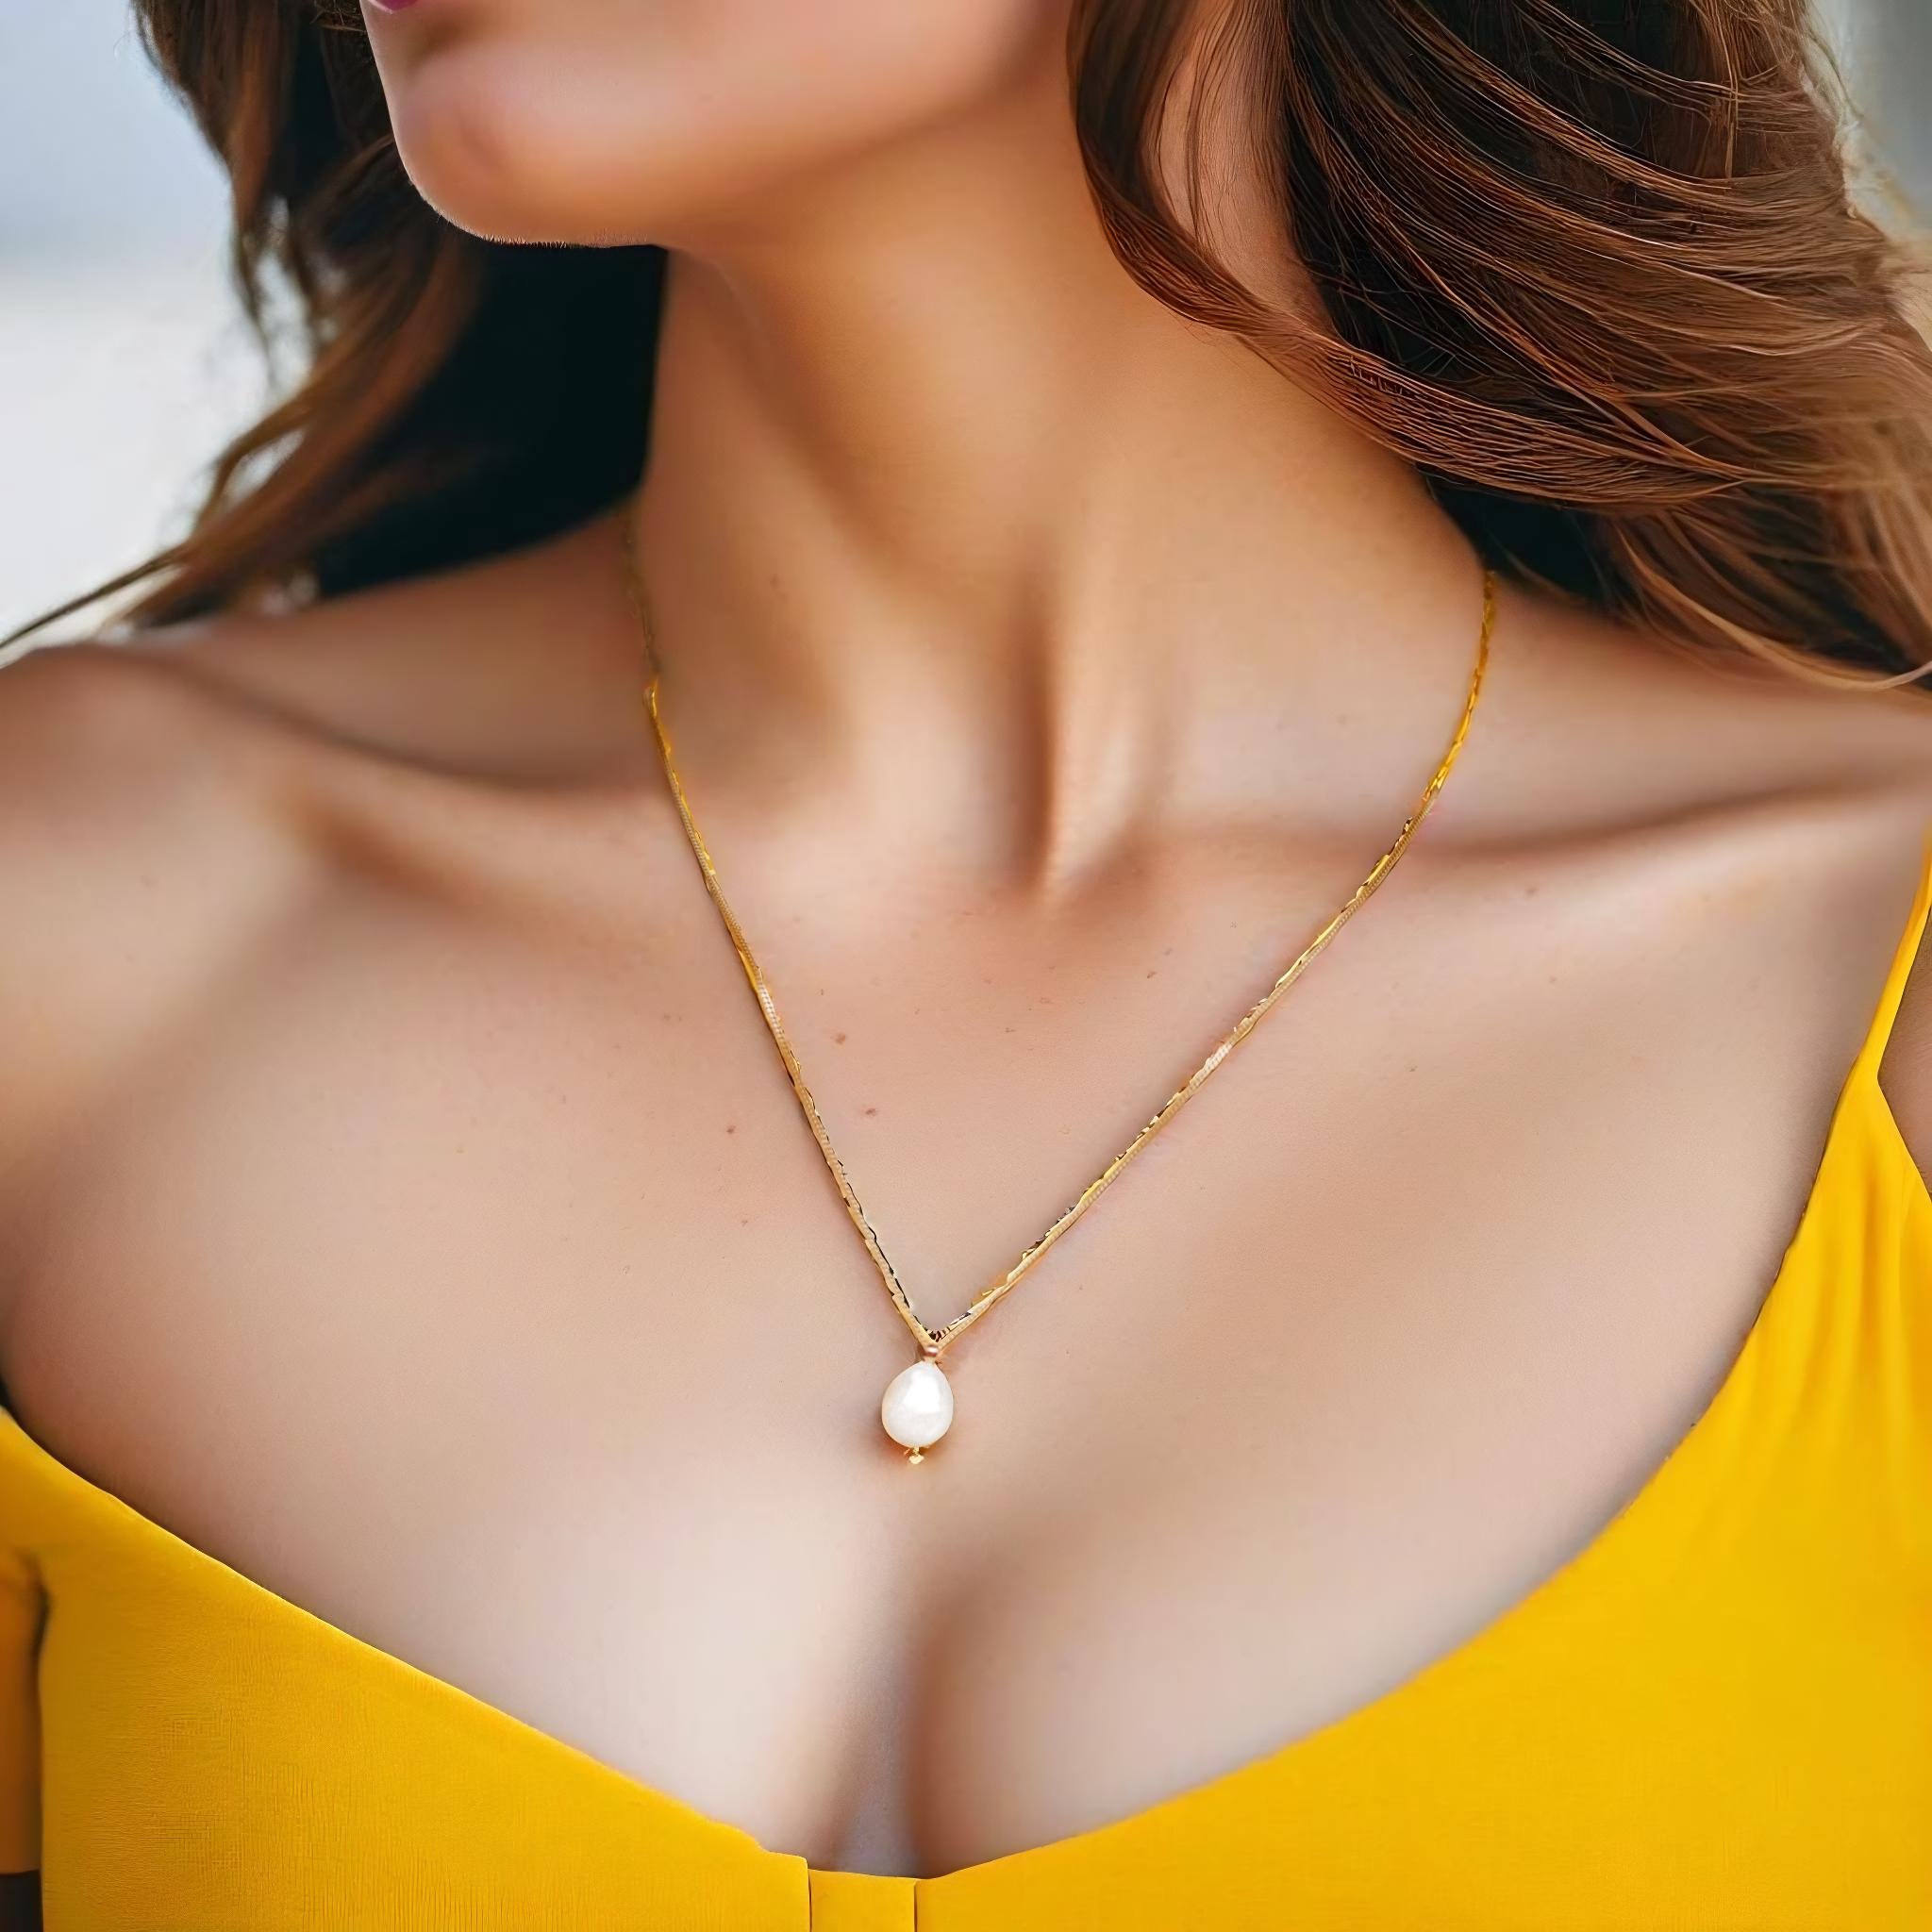 A product around a young woman's neck, yellow top, necklace photography